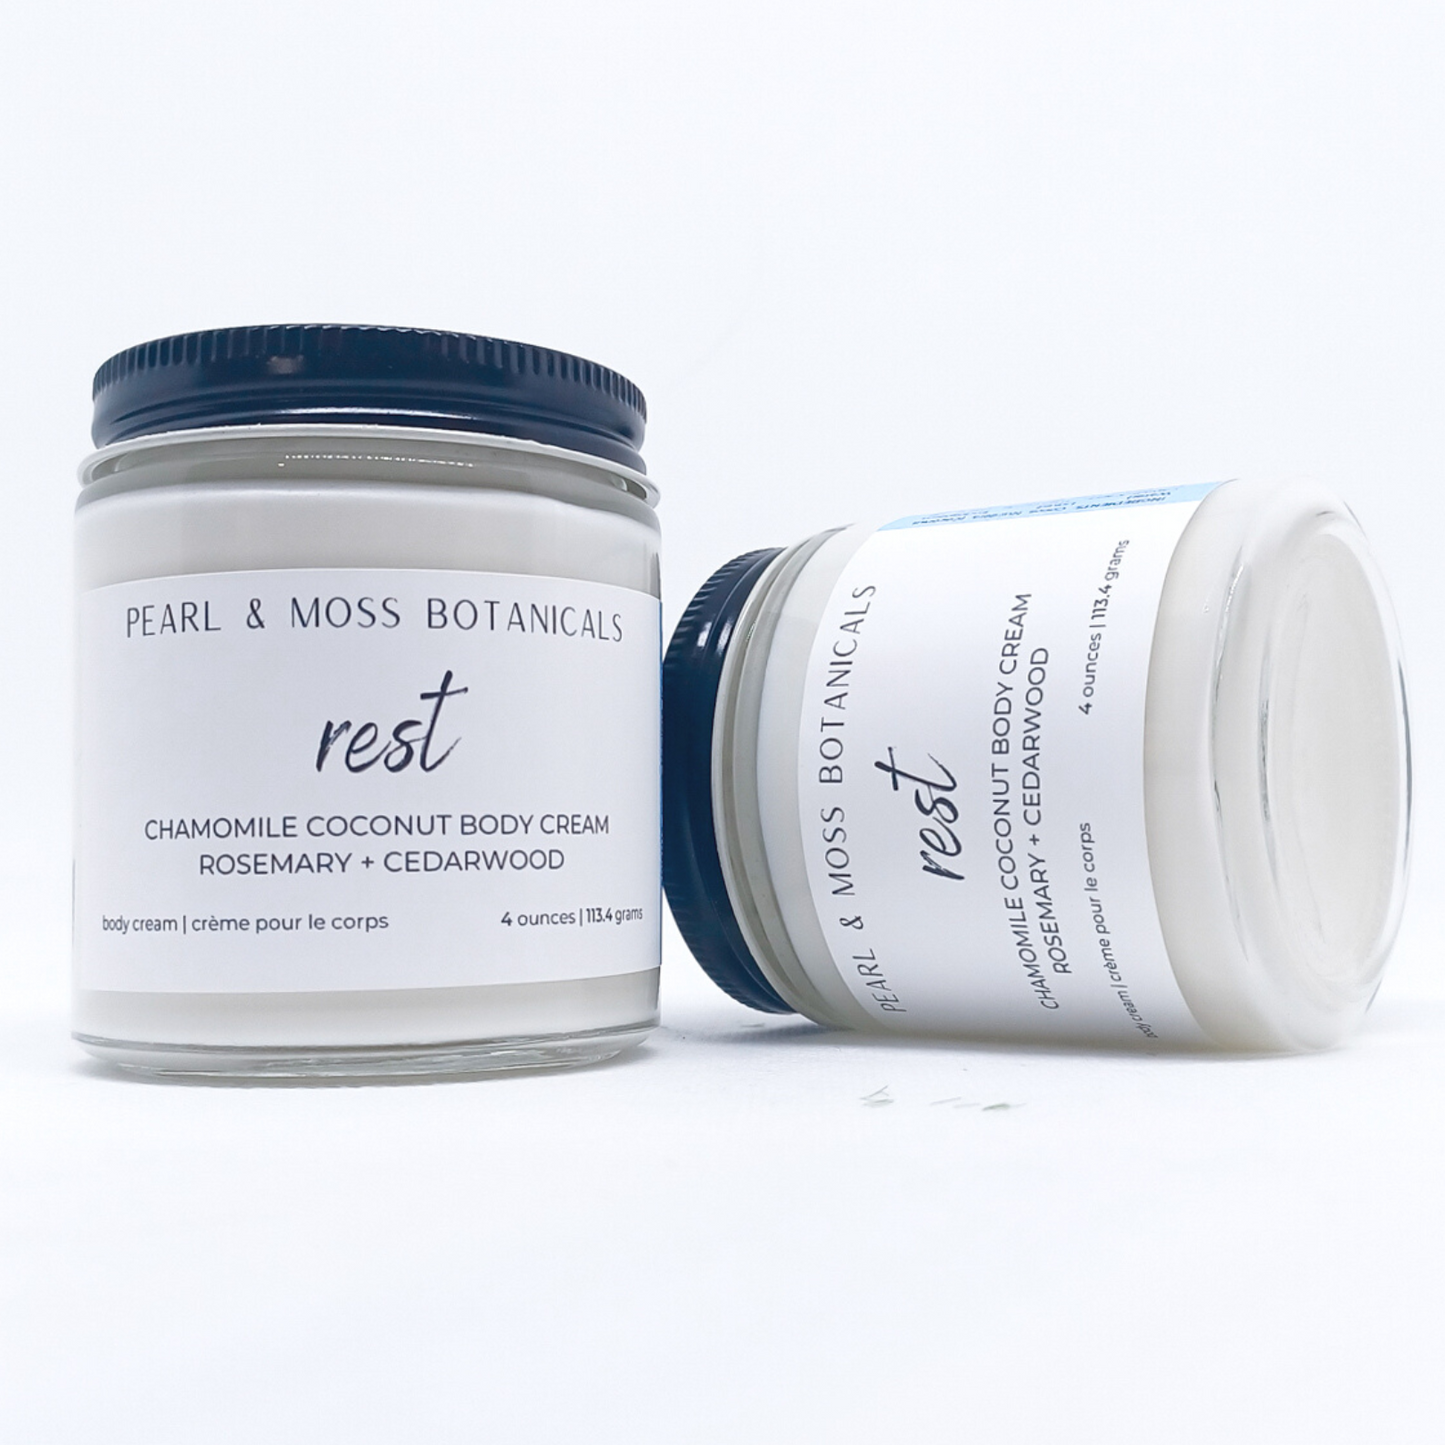 REST: REST is grounding and soothing, combination cedarwood and rosemary essential oils.  Light and smooth, the Chamomile Coconut Body Cream is softening and conditioning for the skin, with extra soothing effects from chamomile extract. Rich and luxurious, tucuma and babassu butter shine in this body cream, bringing a velvety smooth finish to your skin, while providing delicious hydration to your skin, courtesy of coconut water.